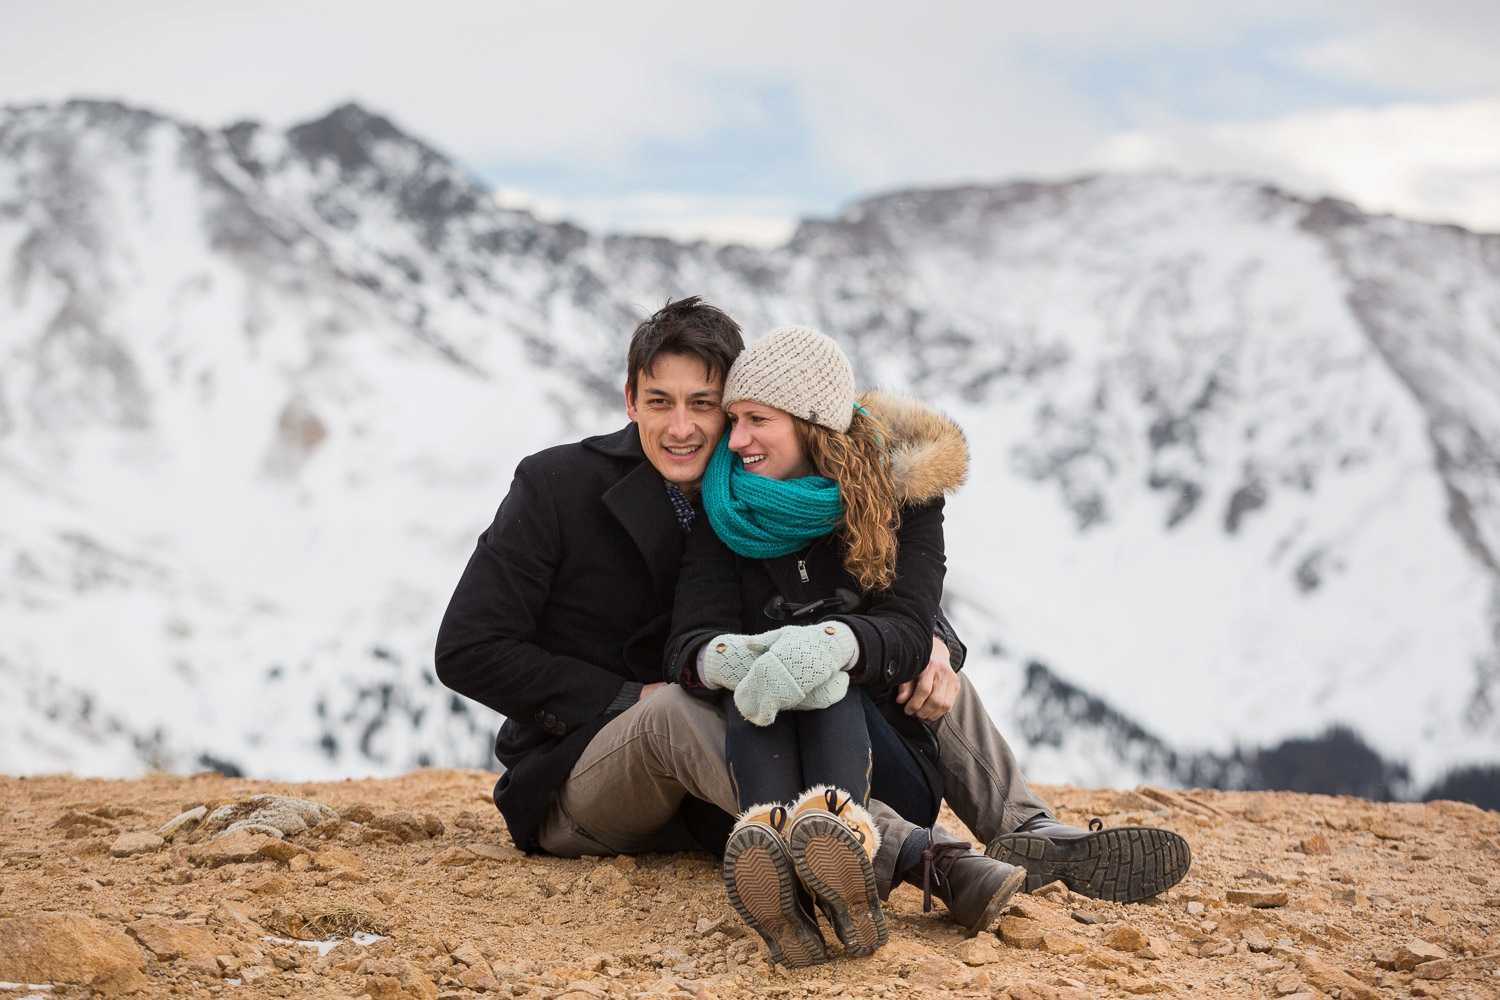 loveland pass colorado engagement photography in winter